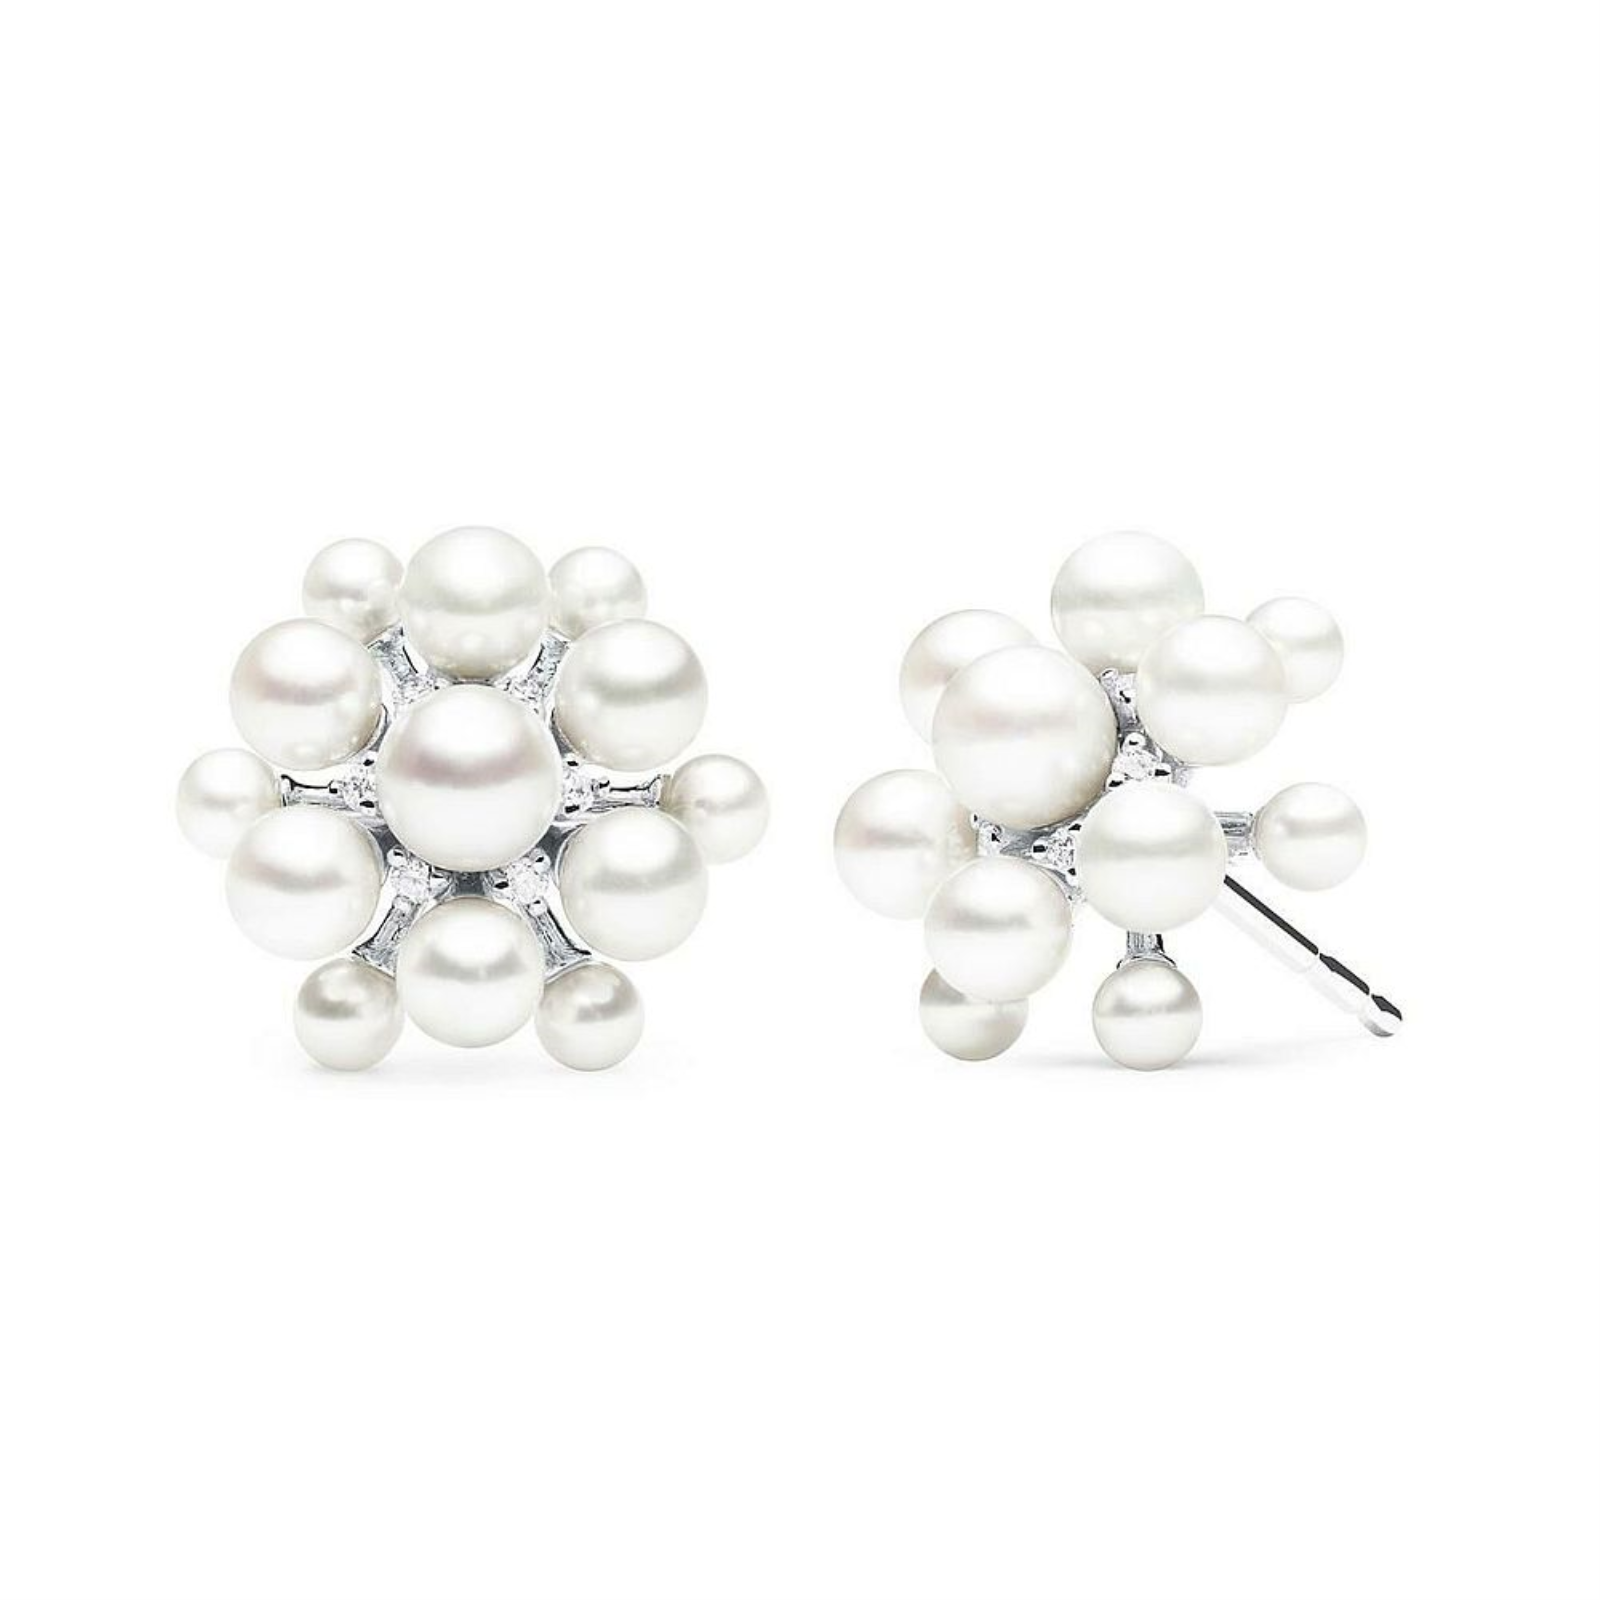 White Gold and Pearl Stud Earrings